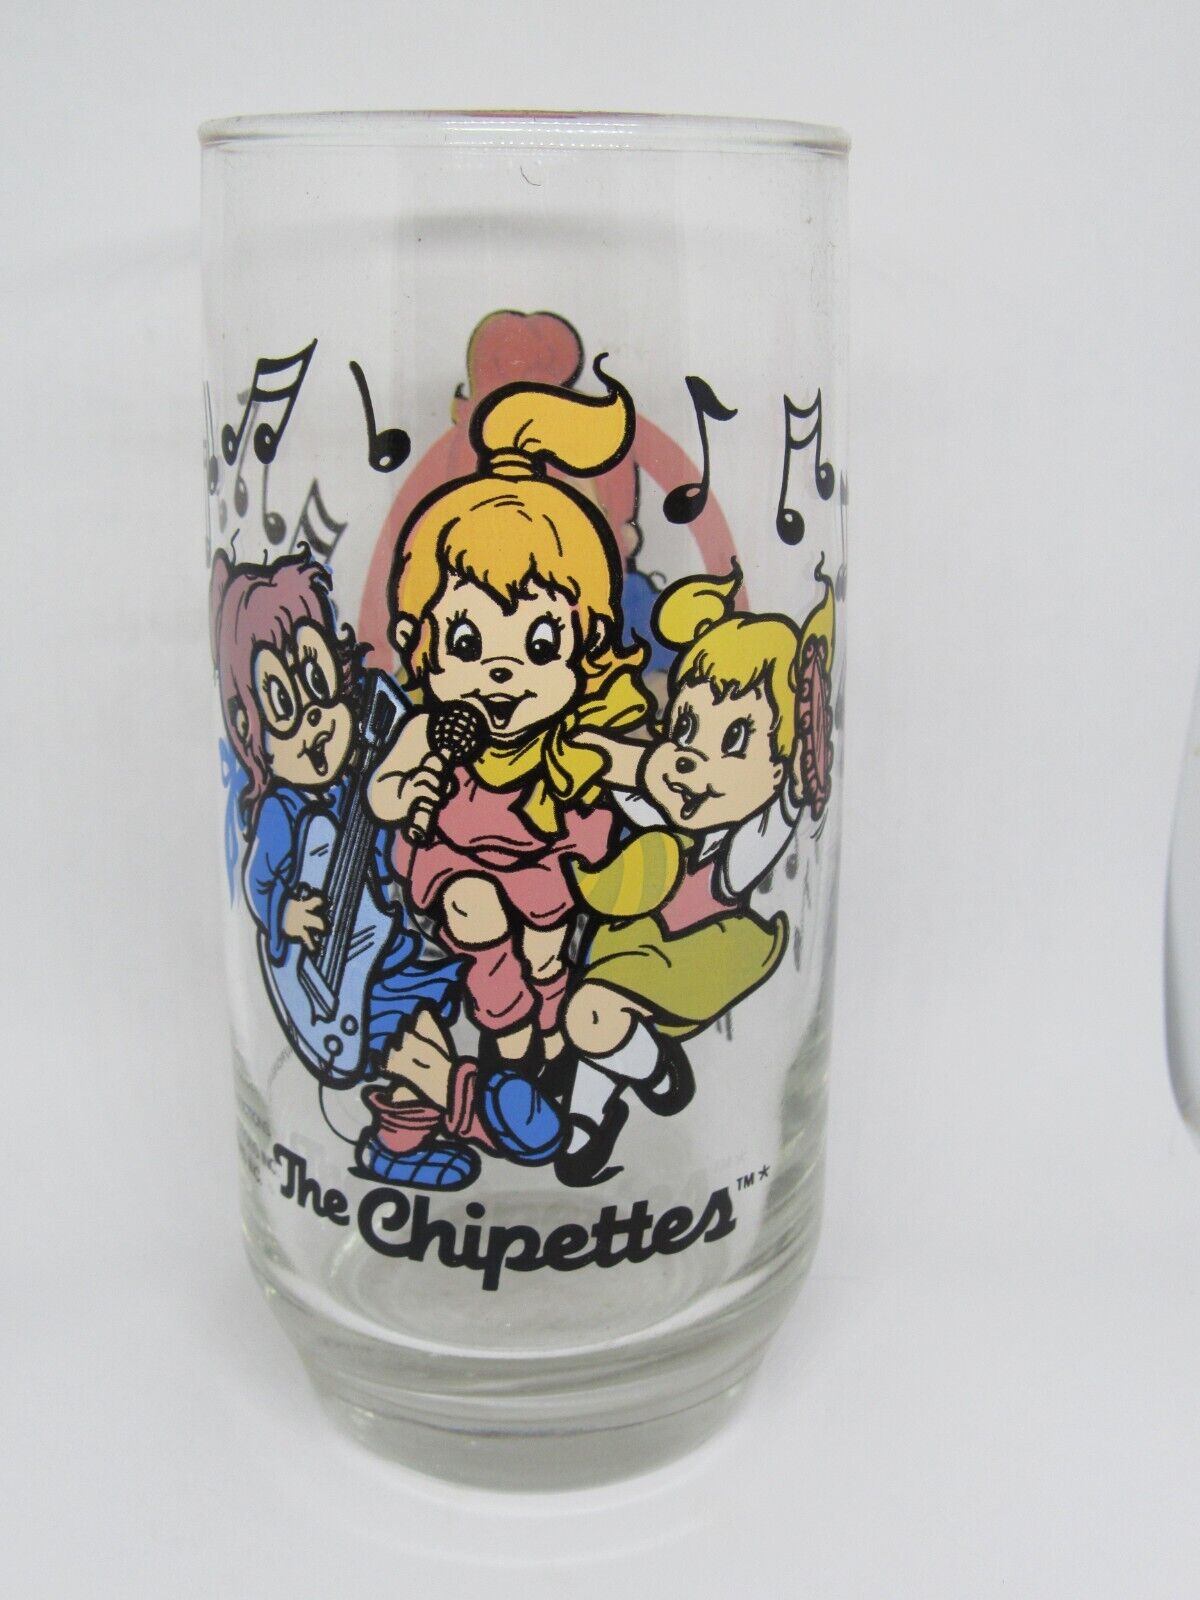 Vintage 1985 Alvin and the Chipmunks The Chipettes Glass Collectors